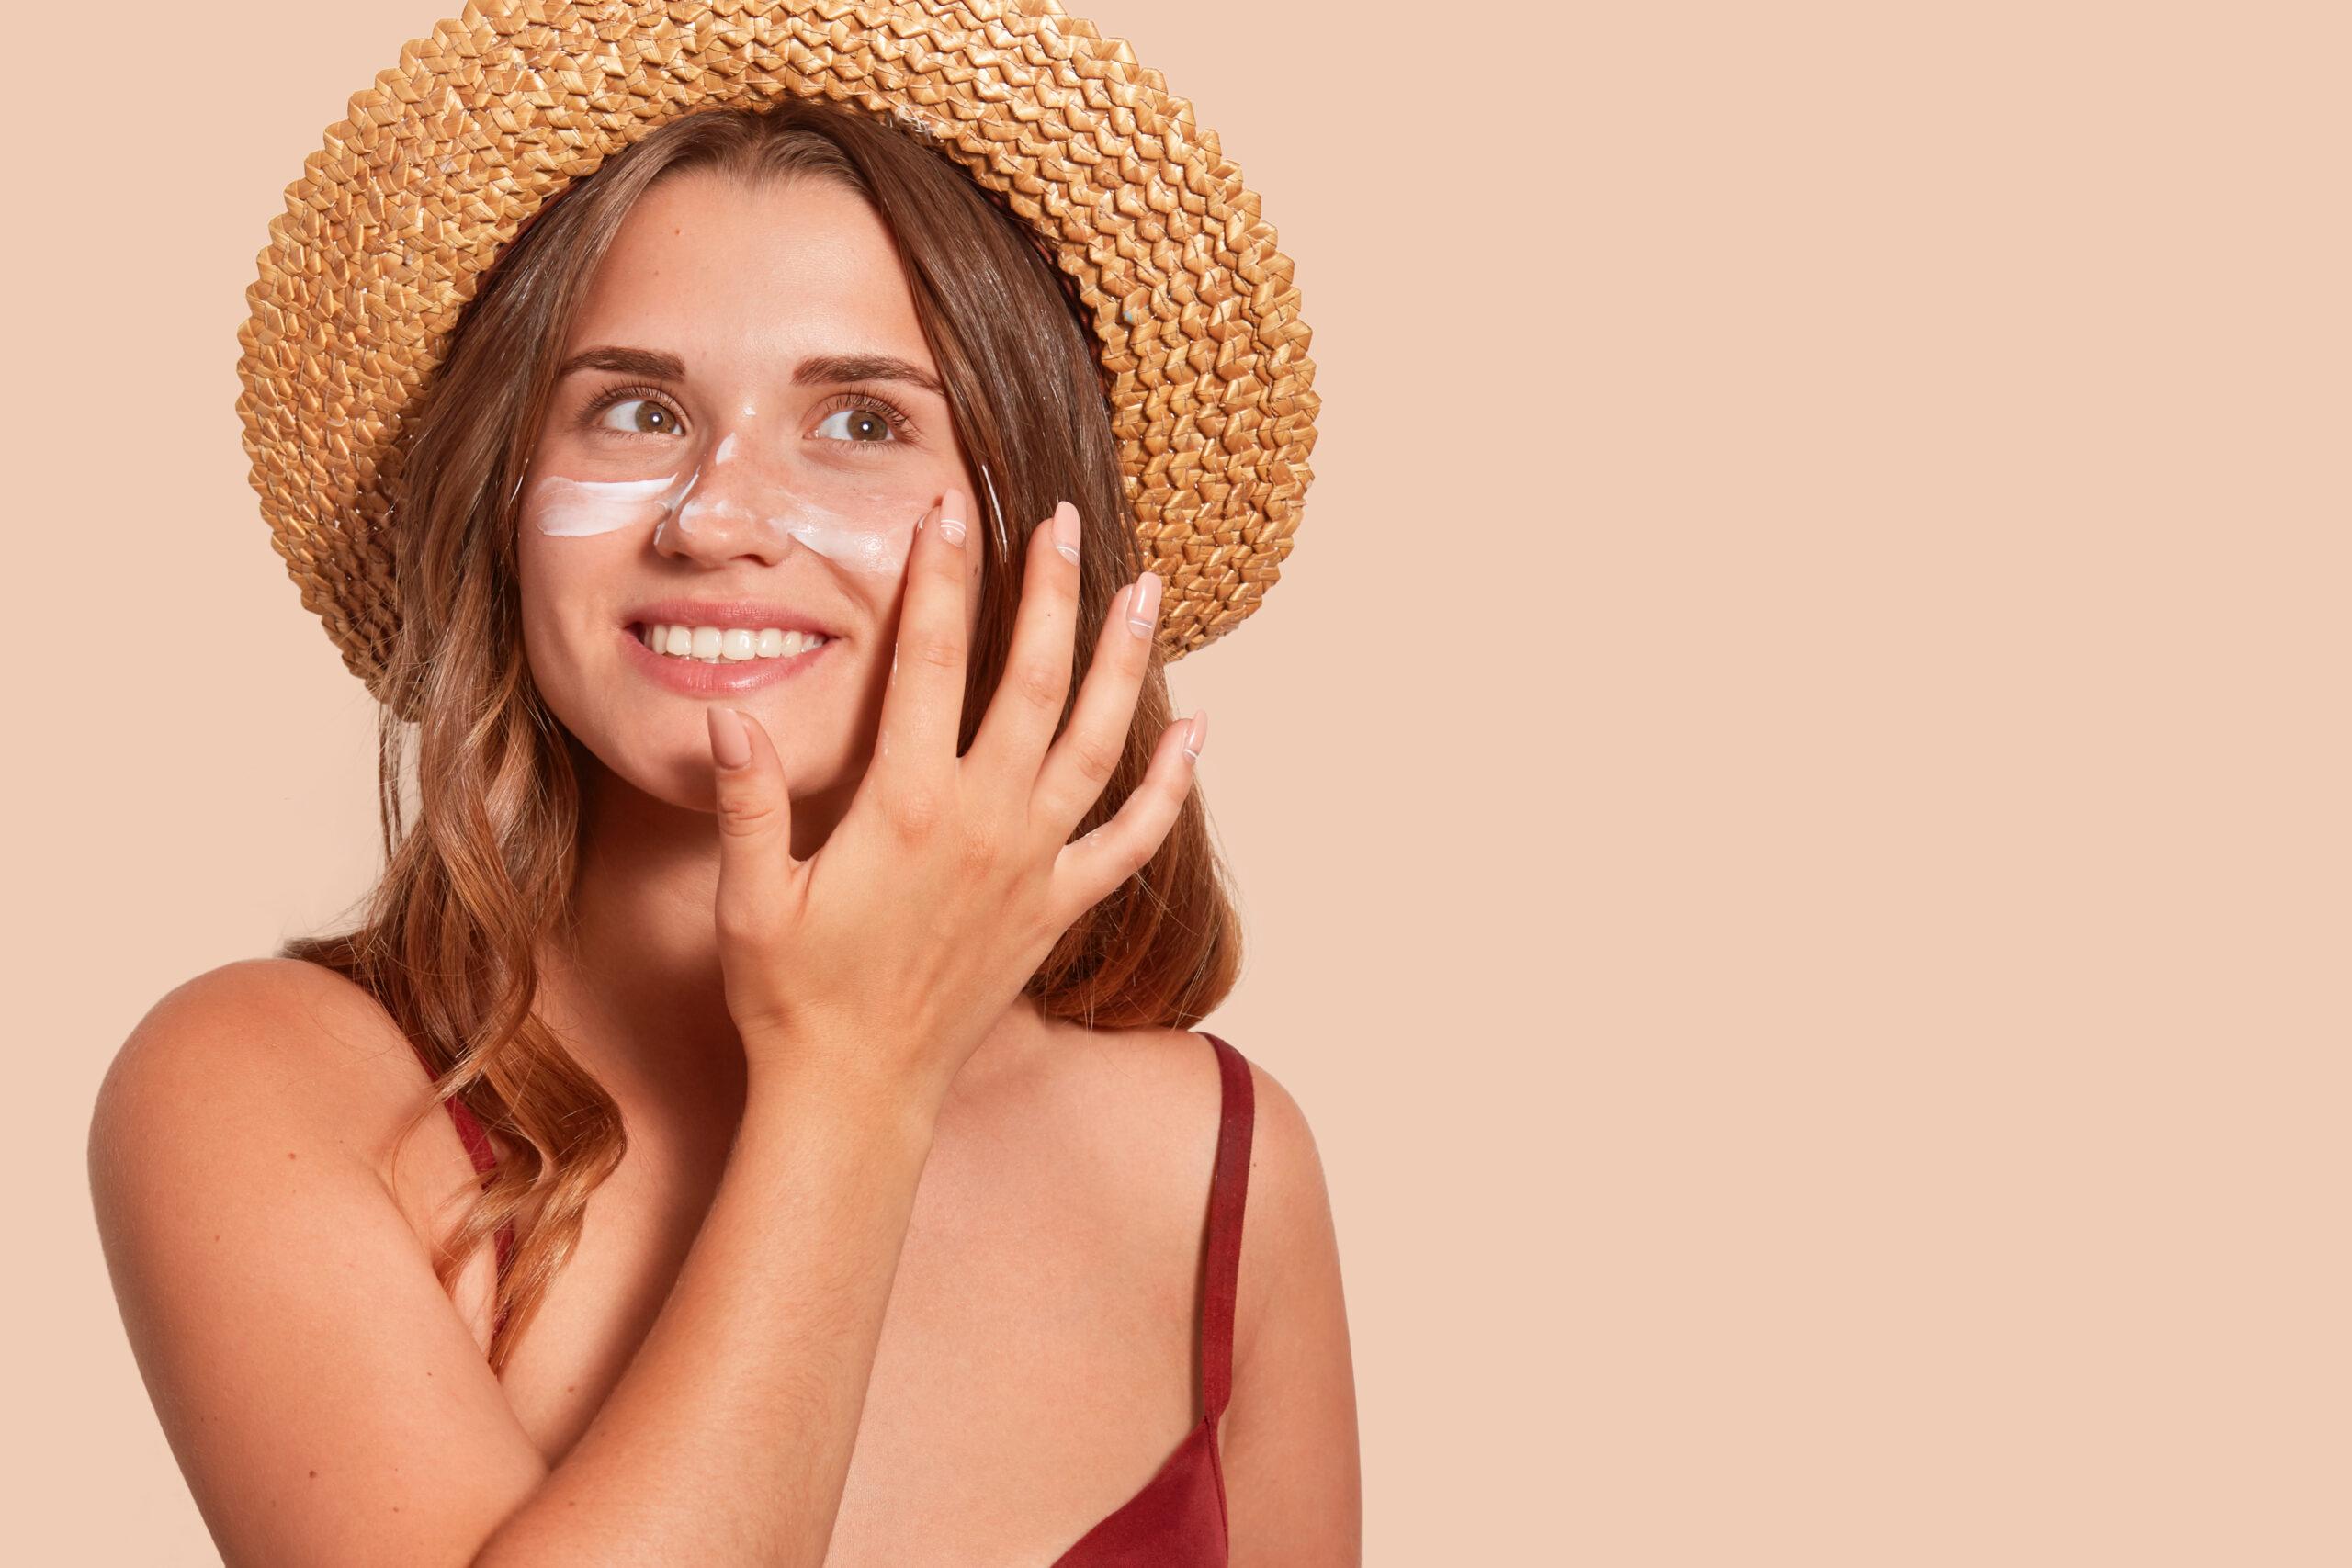 Woman in sunhat applying sunscreen to her cheeks.